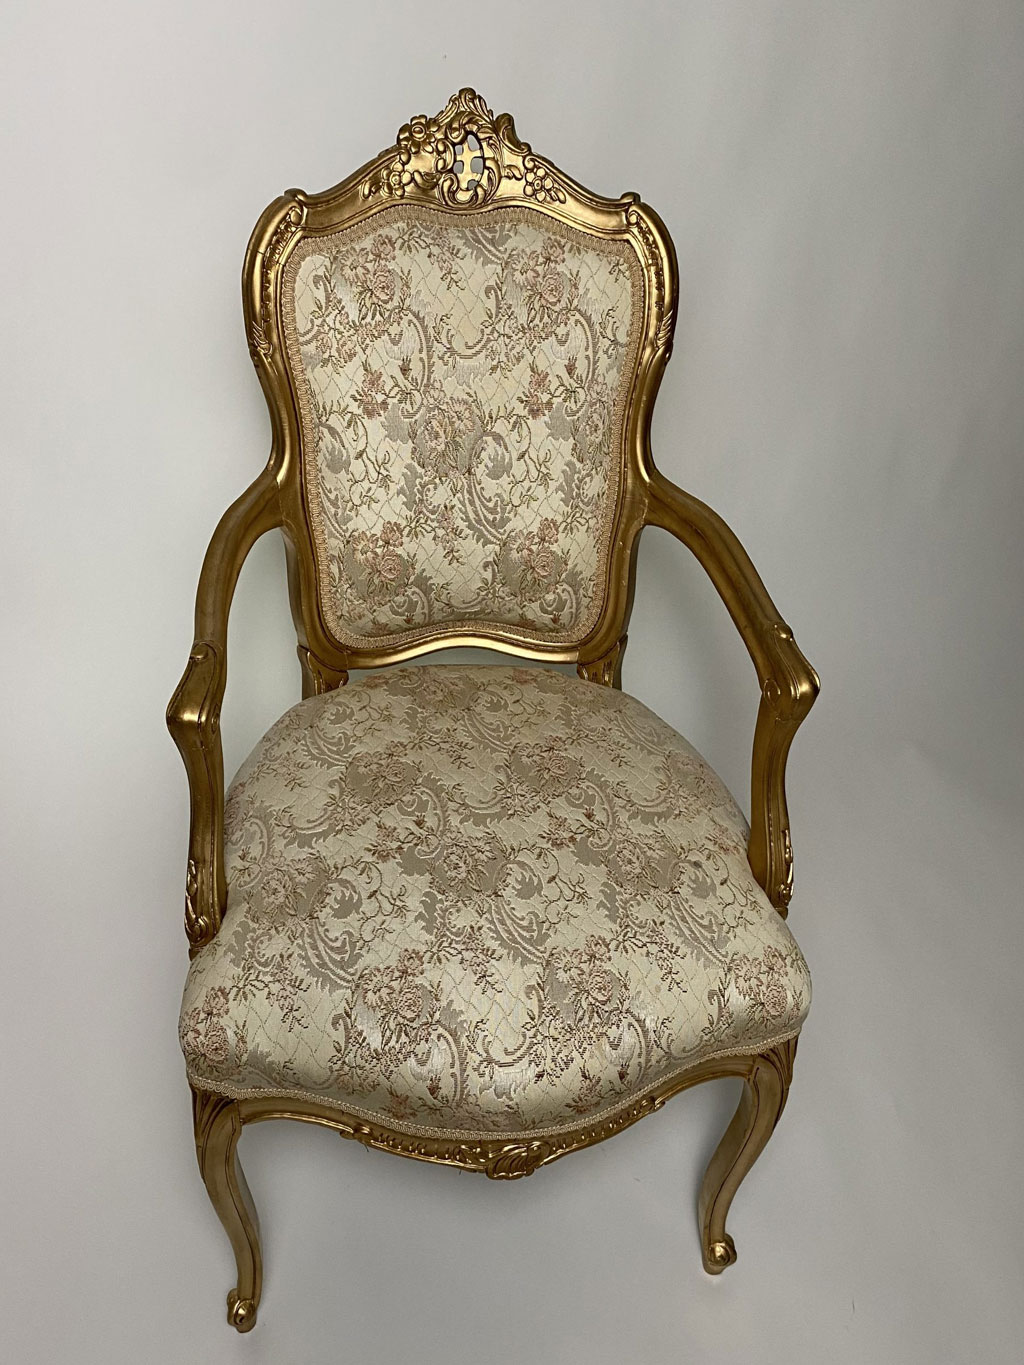 Antique Gold Trim Chair with Patterned Fabric